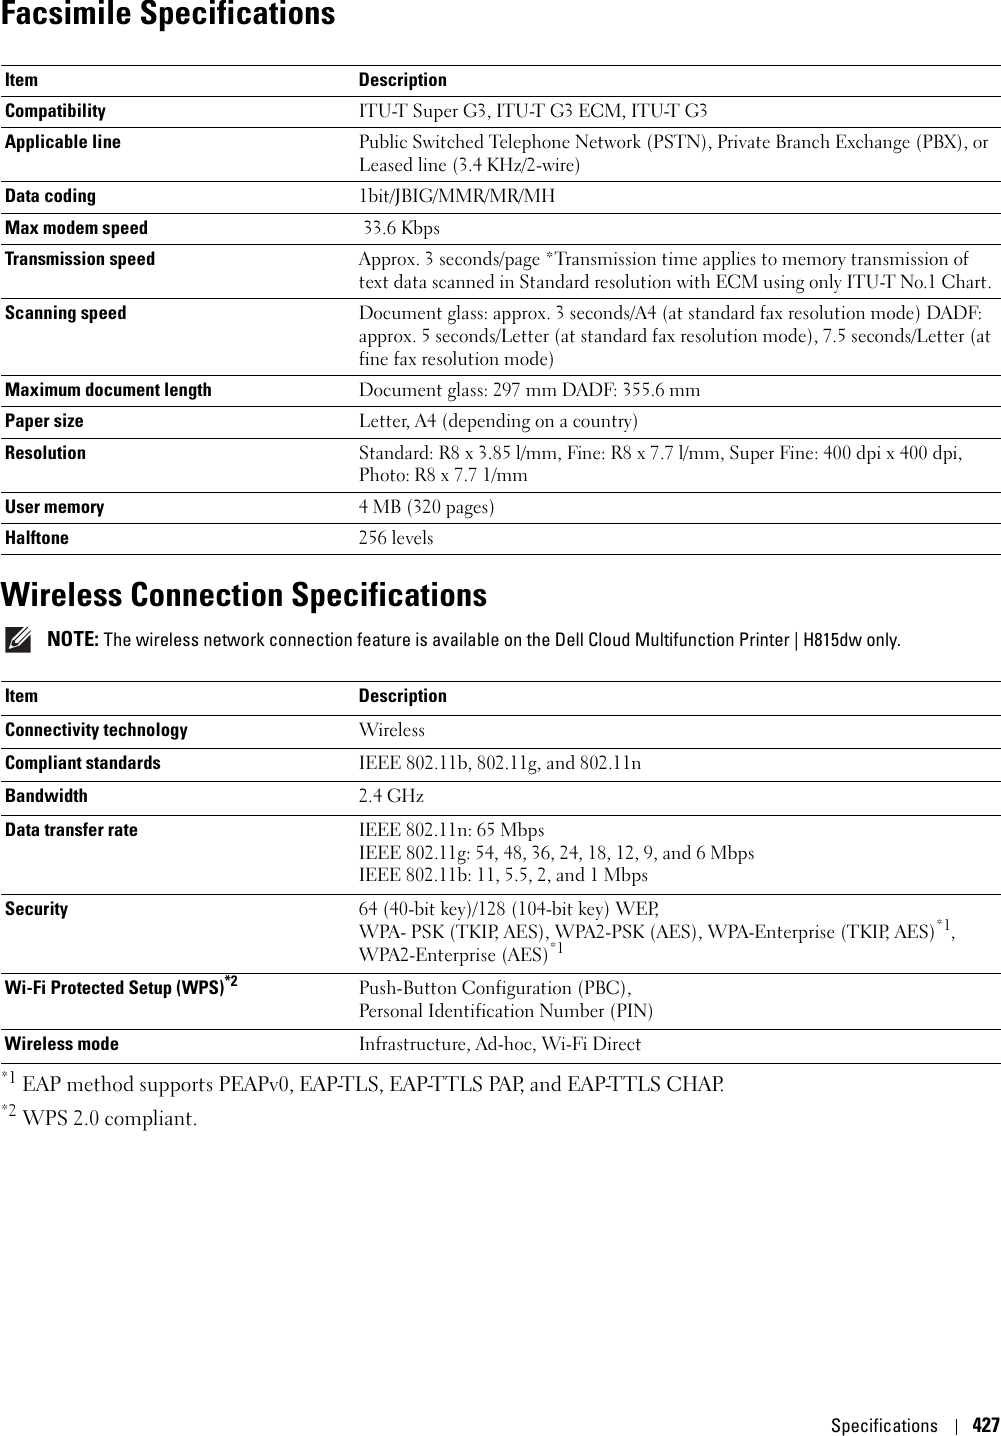 Specifications427Facsimile SpecificationsWireless Connection Specifications NOTE: The wireless network connection feature is available on the Dell Cloud Multifunction Printer | H815dw only.*1 EAP method supports PEAPv0, EAP-TLS, EAP-TTLS PAP, and EAP-TTLS CHAP.*2 WPS 2.0 compliant.Item DescriptionCompatibility ITU-T Super G3, ITU-T G3 ECM, ITU-T G3 Applicable line Public Switched Telephone Network (PSTN), Private Branch Exchange (PBX), or Leased line (3.4 KHz/2-wire)Data coding 1bit/JBIG/MMR/MR/MHMax modem speed  33.6 Kbps Transmission speed Approx. 3 seconds/page *Transmission time applies to memory transmission of text data scanned in Standard resolution with ECM using only ITU-T No.1 Chart. Scanning speed Document glass: approx. 3 seconds/A4 (at standard fax resolution mode) DADF: approx. 5 seconds/Letter (at standard fax resolution mode), 7.5 seconds/Letter (at fine fax resolution mode) Maximum document length Document glass: 297 mm DADF: 355.6 mm Paper size Letter, A4 (depending on a country)Resolution Standard: R8 x 3.85 l/mm, Fine: R8 x 7.7 l/mm, Super Fine: 400 dpi x 400 dpi, Photo: R8 x 7.7 1/mmUser memory 4 MB (320 pages) Halftone 256 levelsItem DescriptionConnectivity technology WirelessCompliant standards IEEE 802.11b, 802.11g, and 802.11nBandwidth 2.4 GHzData transfer rate IEEE 802.11n: 65 MbpsIEEE 802.11g: 54, 48, 36, 24, 18, 12, 9, and 6 MbpsIEEE 802.11b: 11, 5.5, 2, and 1 MbpsSecurity 64 (40-bit key)/128 (104-bit key) WEP, WPA- PSK (TKIP, AES), WPA2-PSK (AES), WPA-Enterprise (TKIP, AES)*1, WPA2-Enterprise (AES)*1Wi-Fi Protected Setup (WPS)*2Push-Button Configuration (PBC), Personal Identification Number (PIN)Wireless mode  Infrastructure, Ad-hoc, Wi-Fi Direct